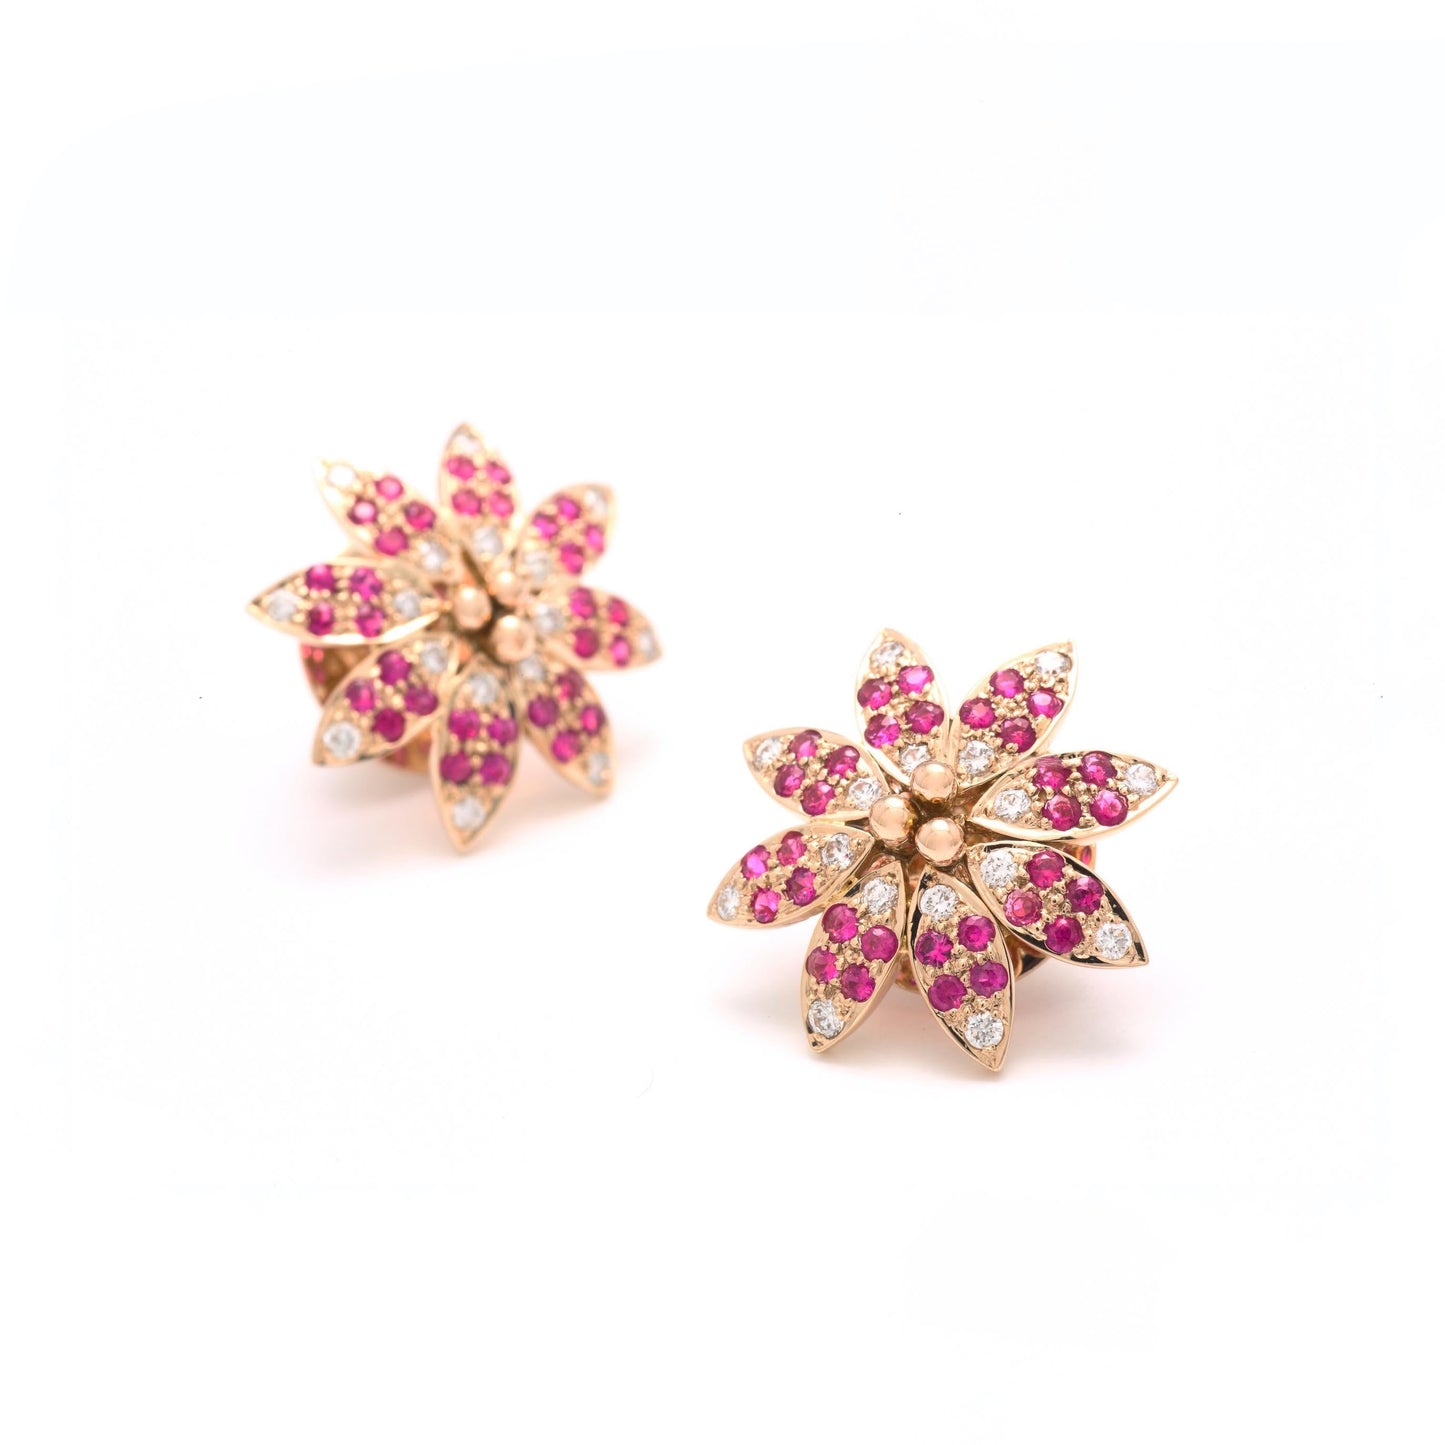 The Chanchal Gold, Ruby and Diamond Ear Studs by Rasvihar